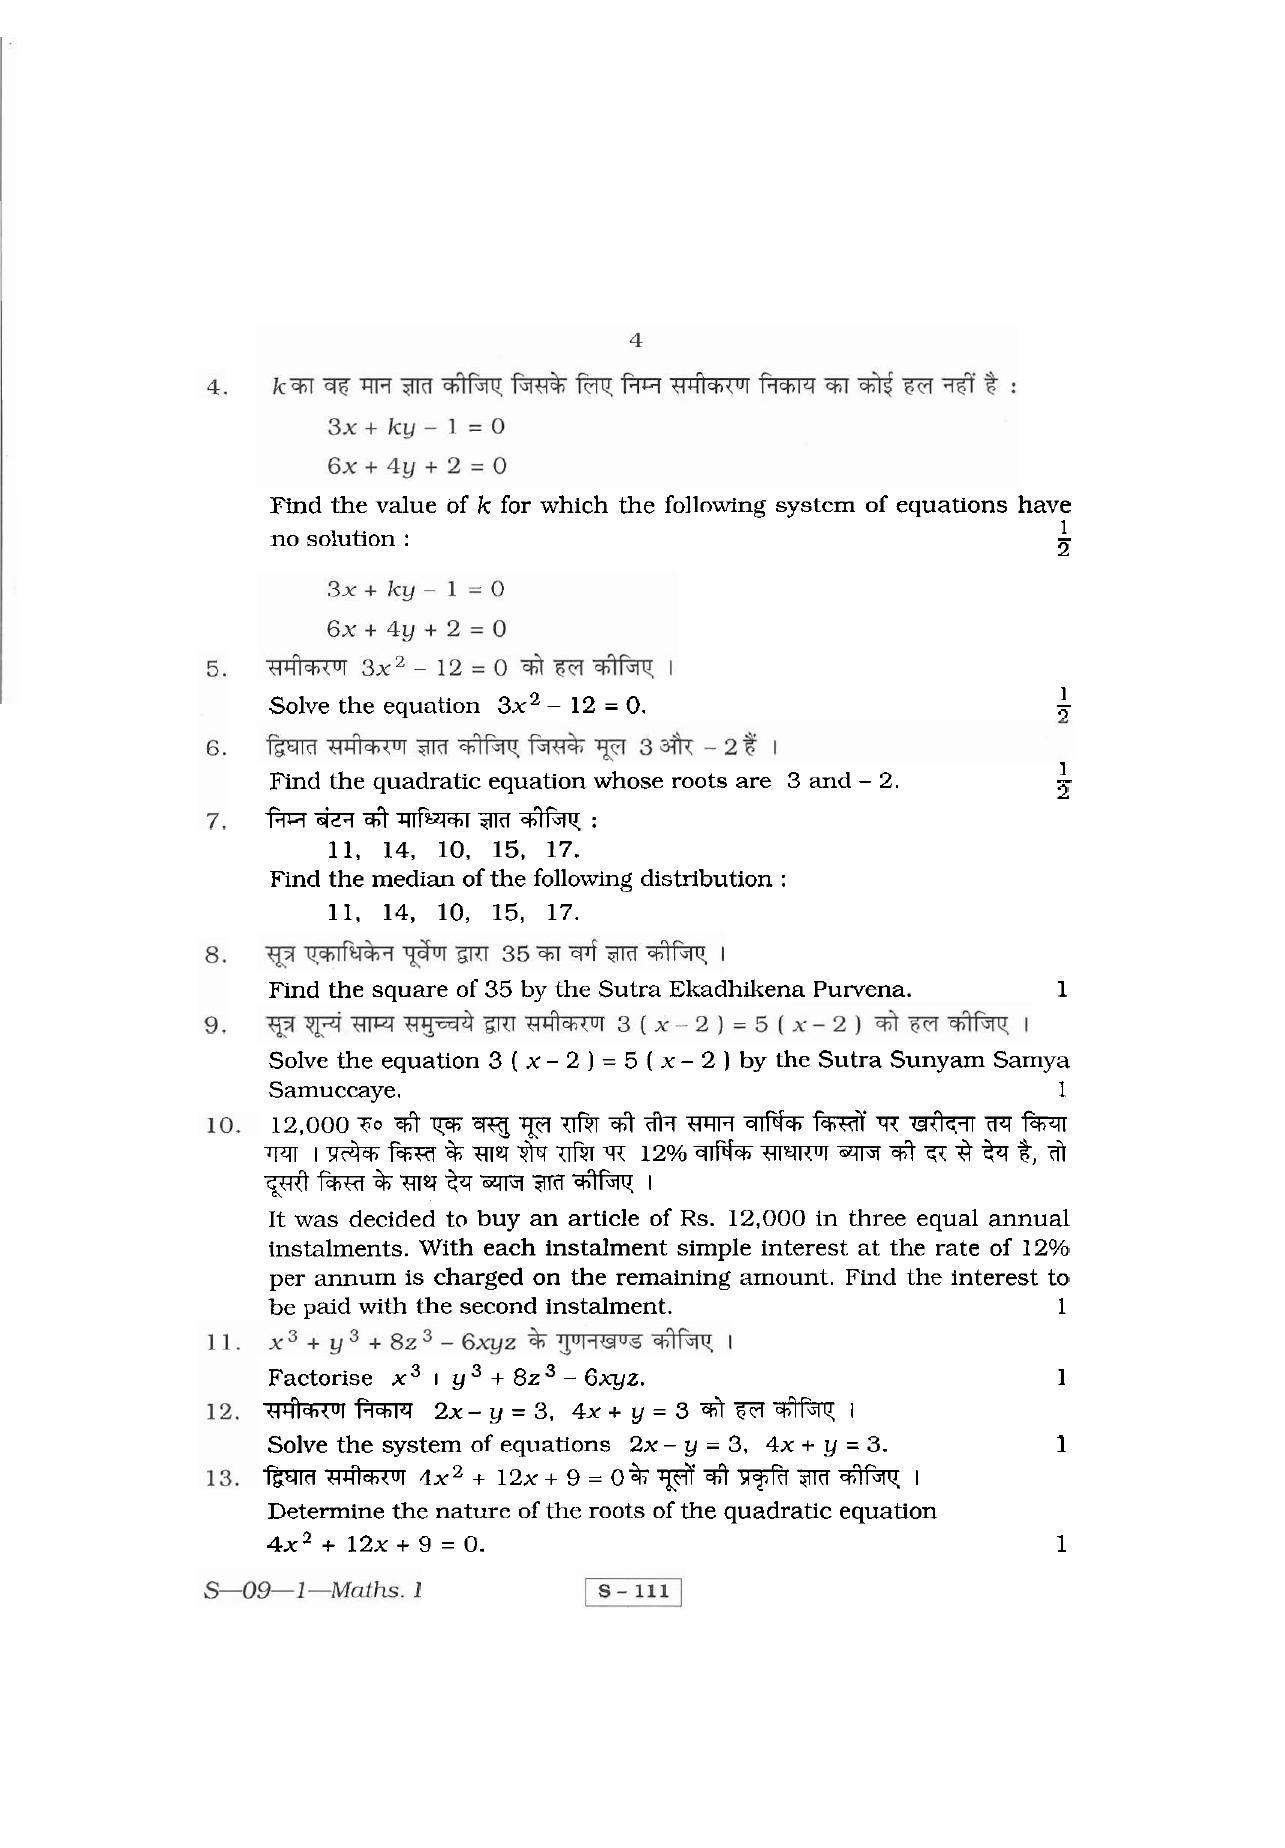 RBSE Class 10 Mathematics  – I 2011 Question Paper - Page 4